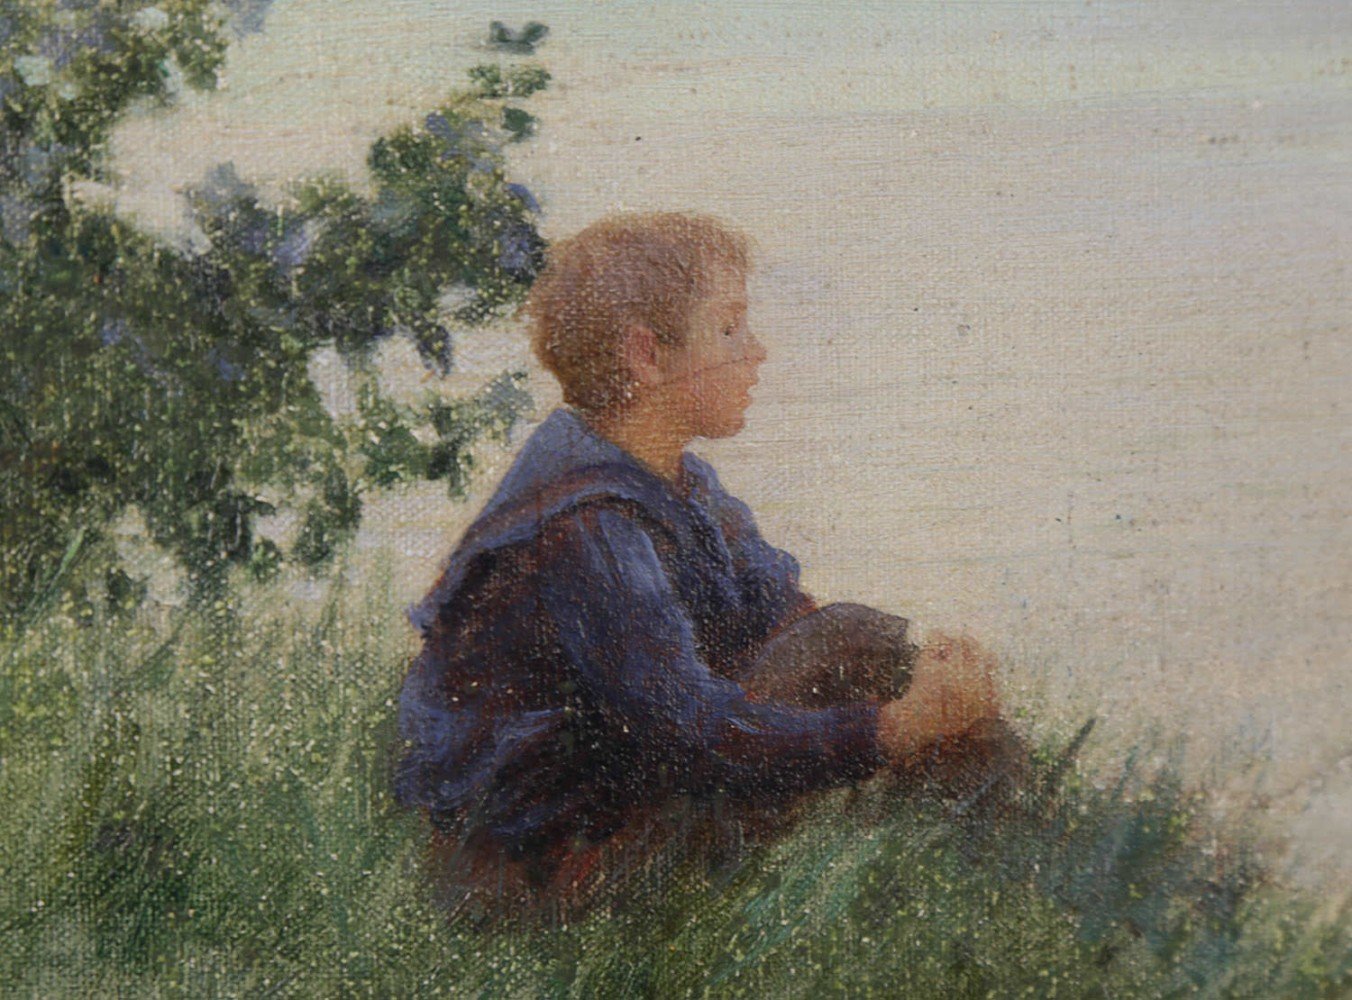 Boy and the Sea by Charles Courtney Curran